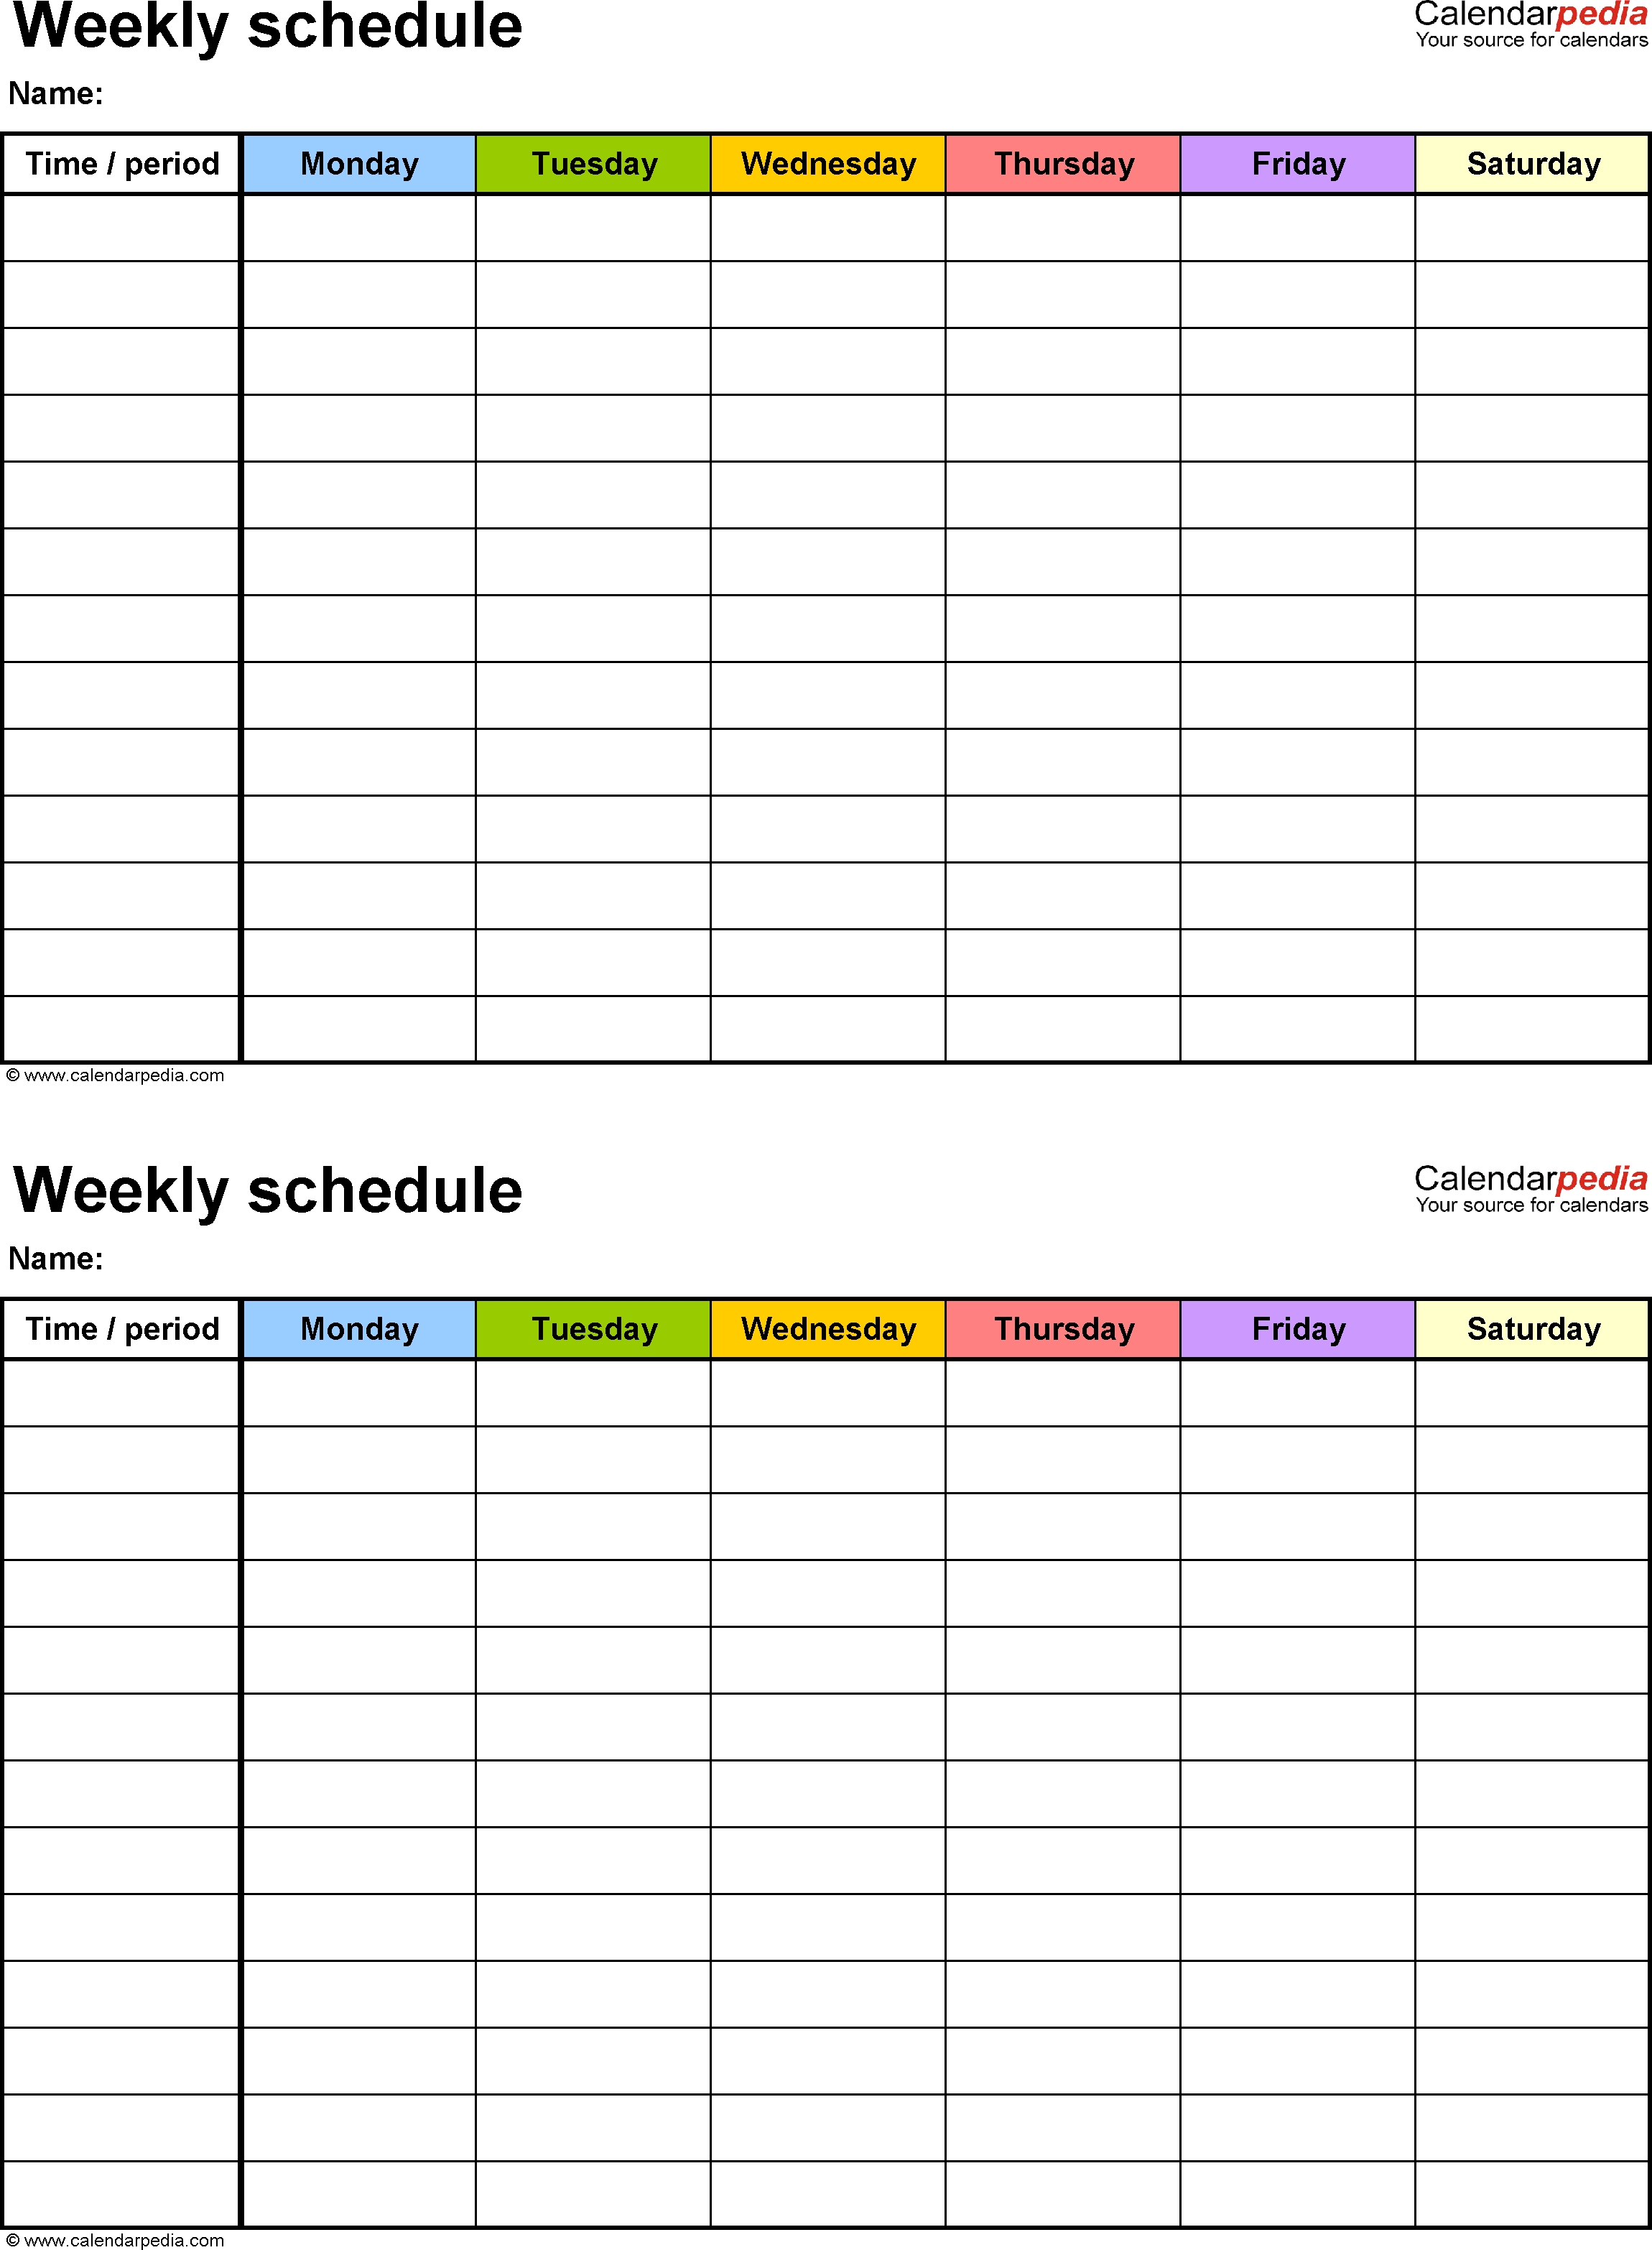 Free Weekly Schedule Templates For Excel - 18 Templates within Appointment Schedule Template Sunday To Saturday